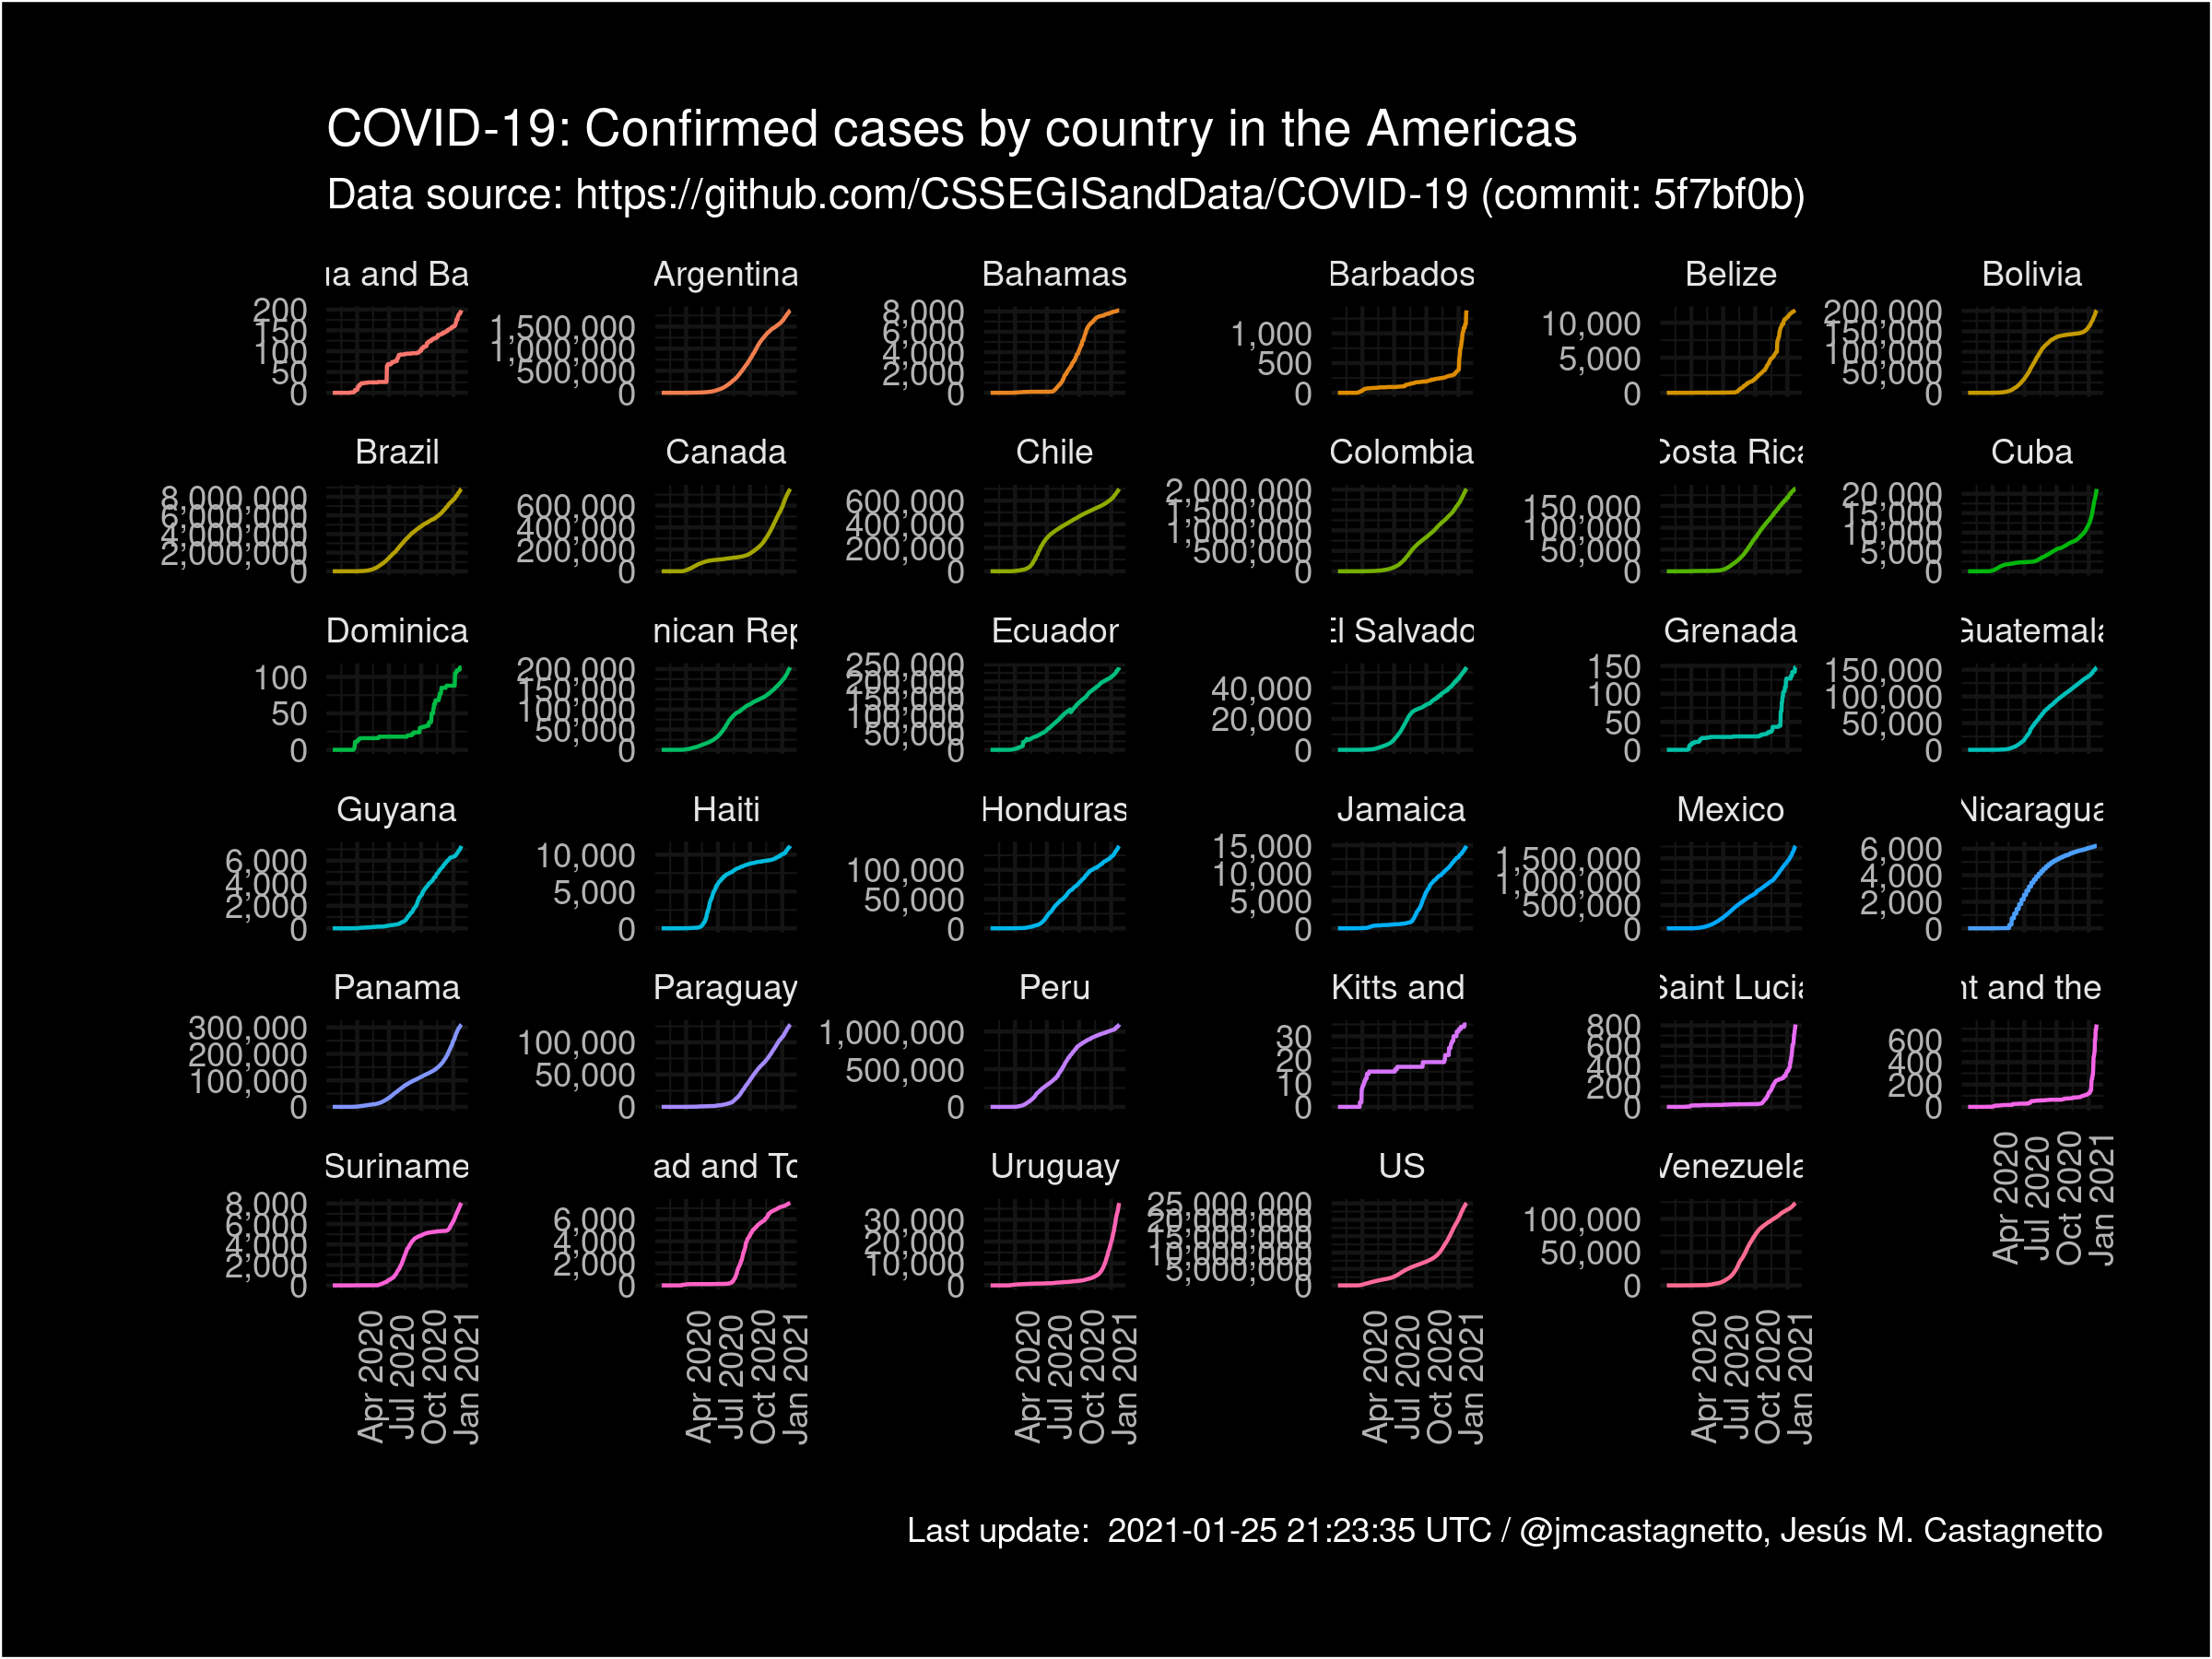 COVID-19 Confirmed cases by country (Americas)